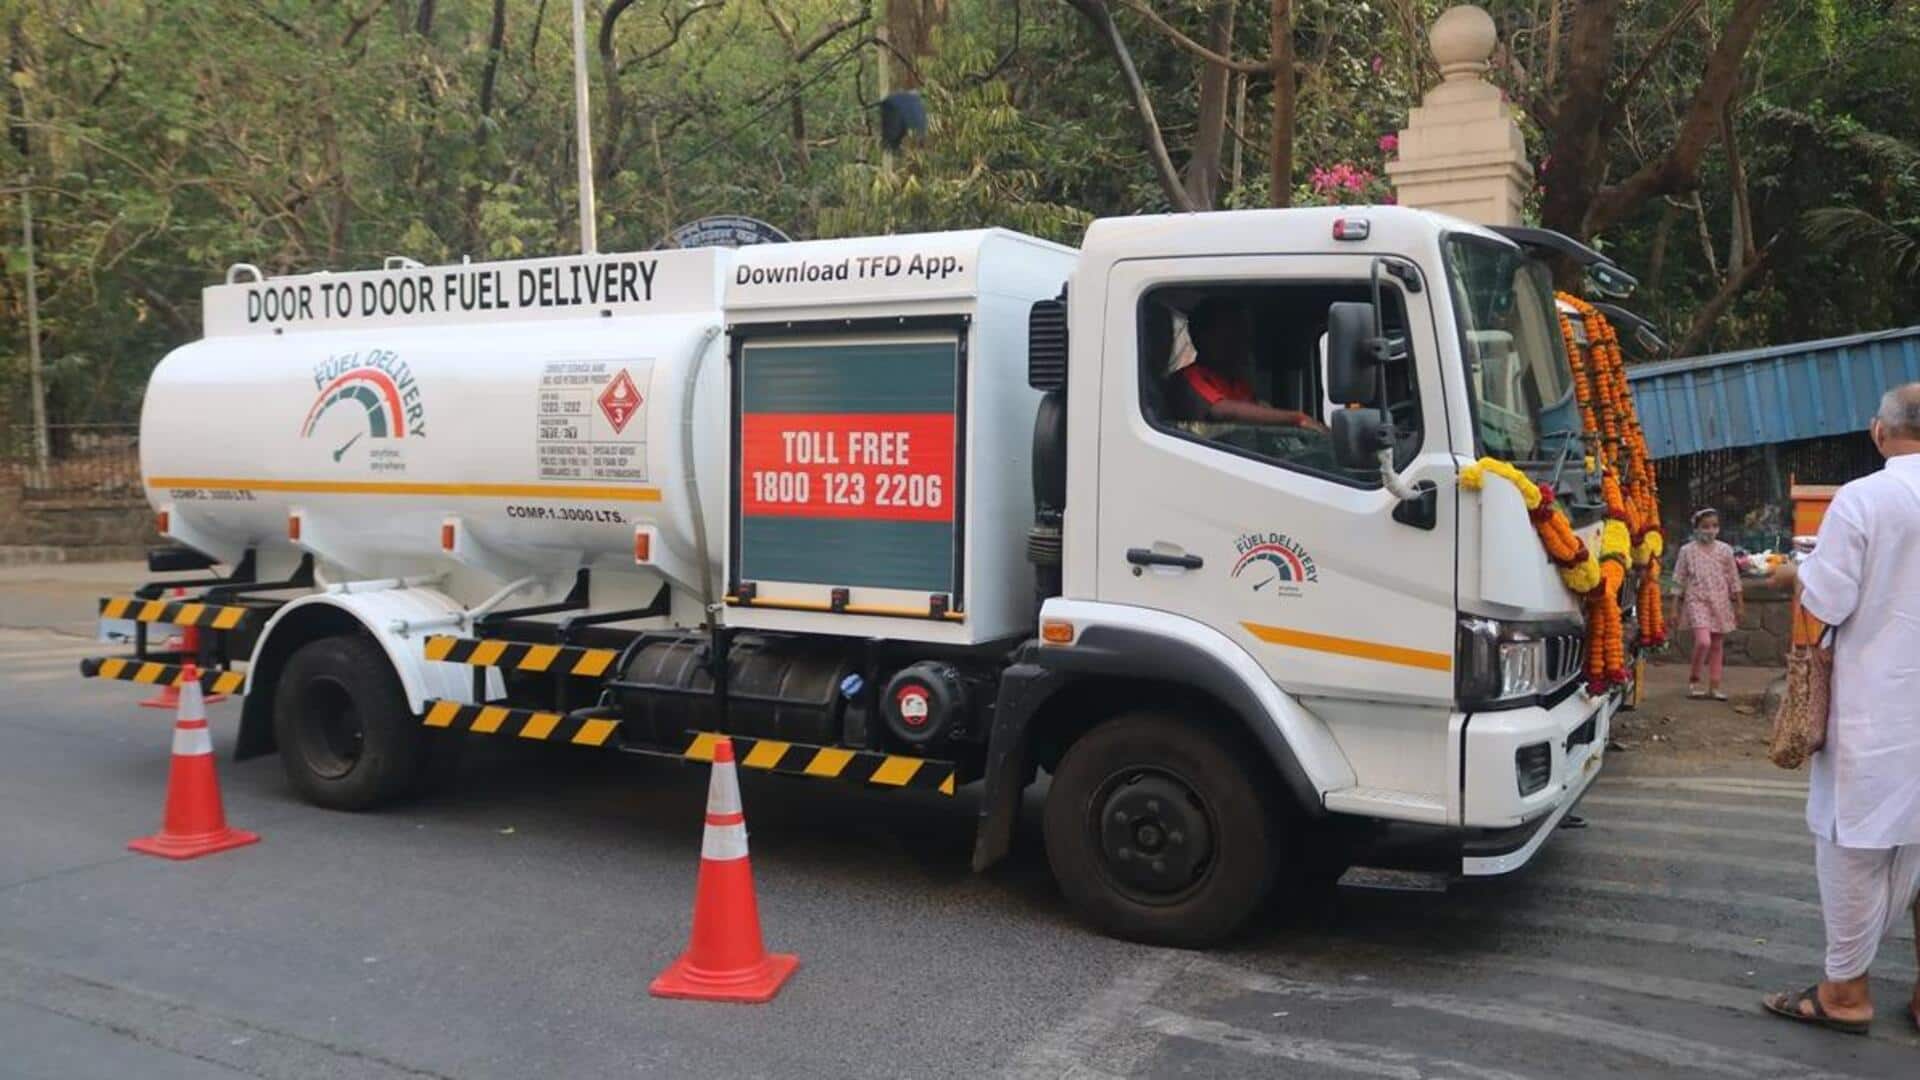 Door-to-door fuel delivery now available in India: How to use